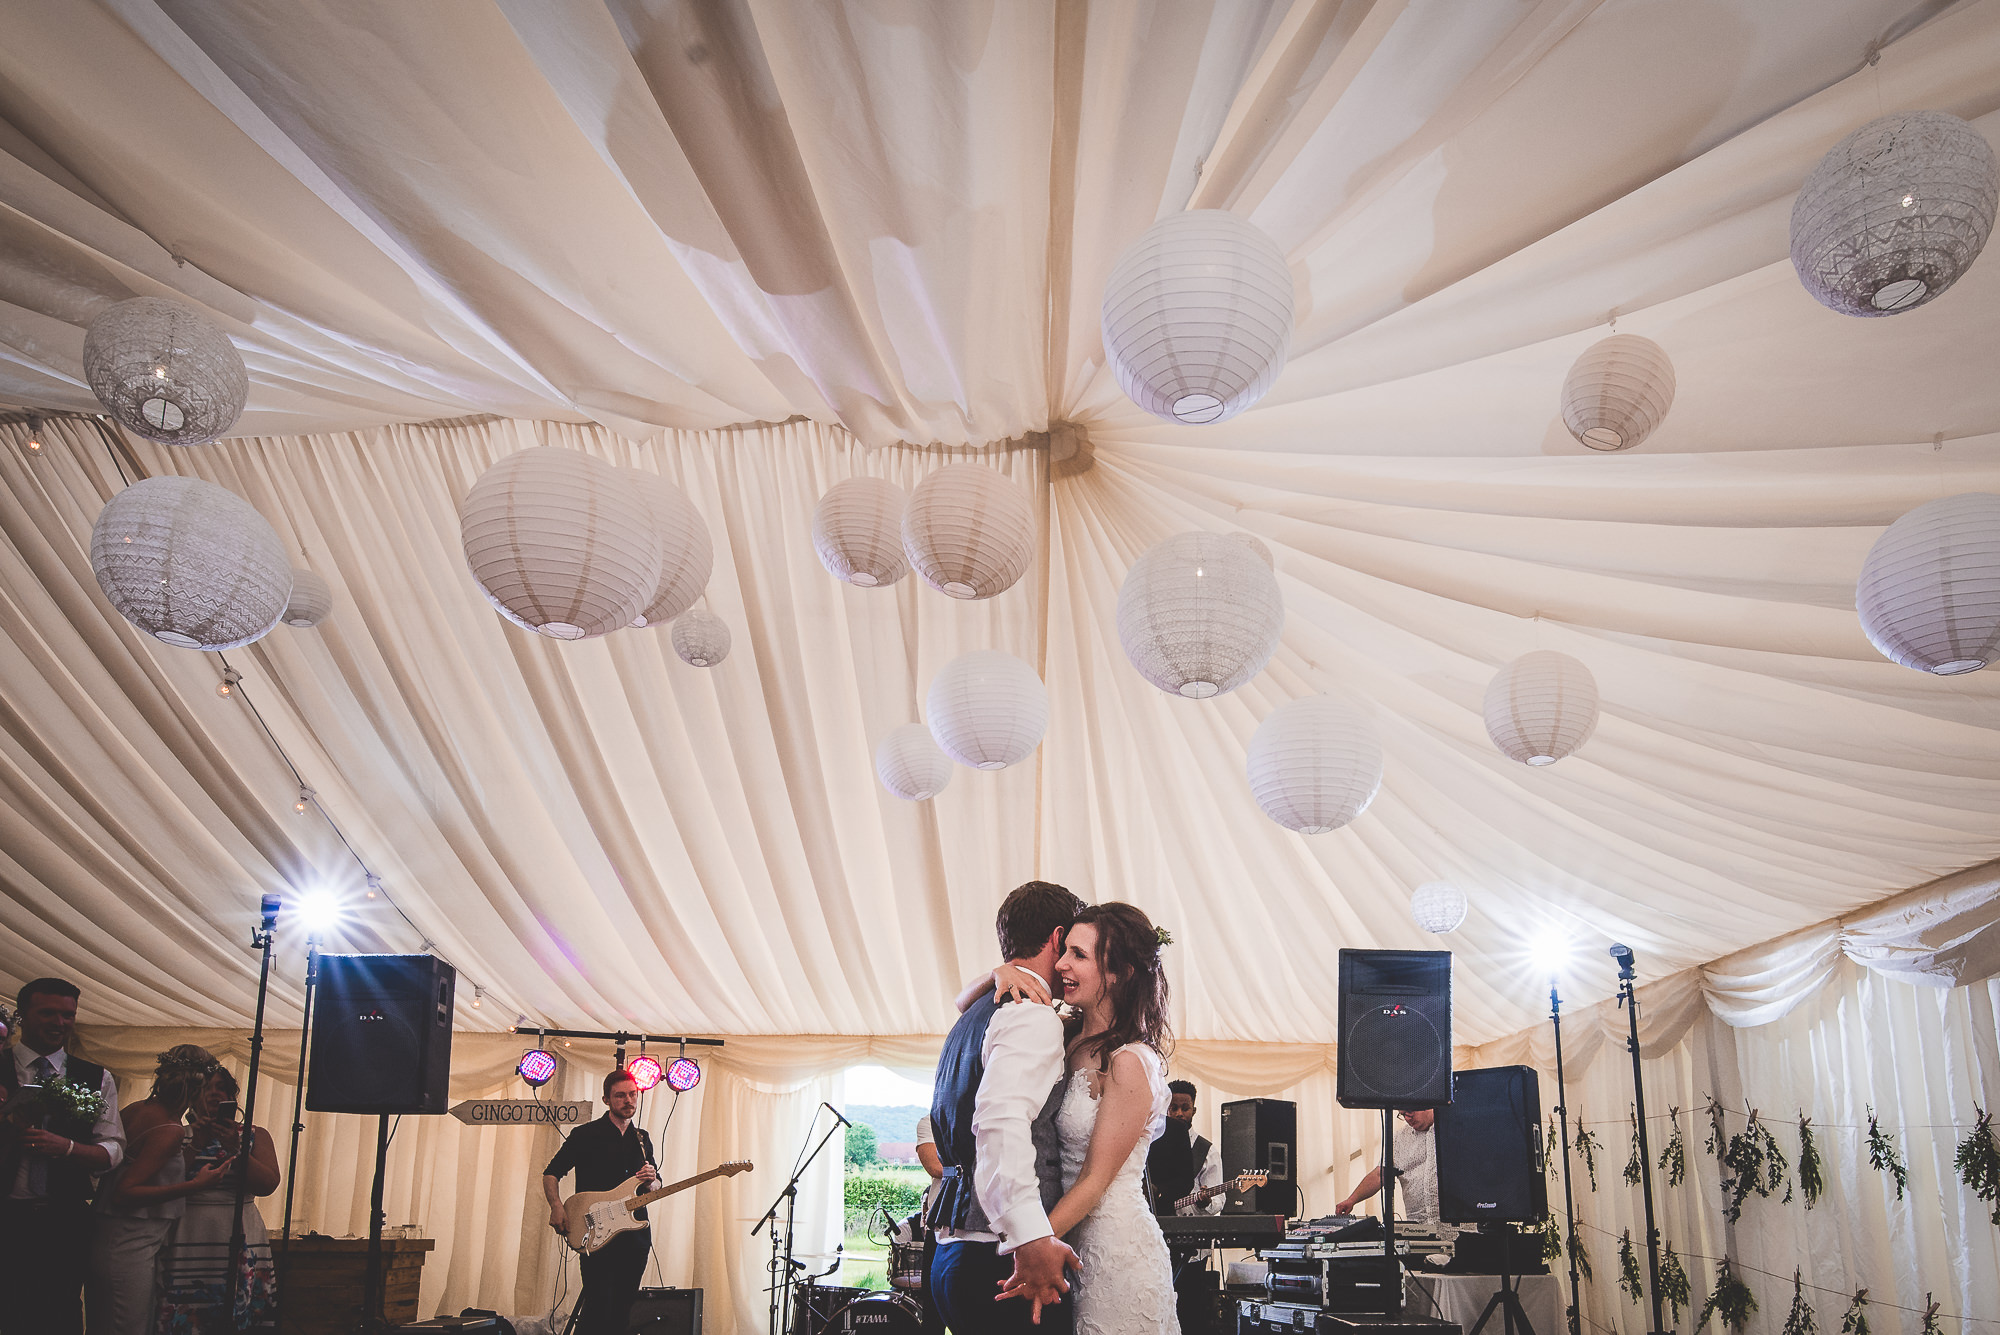 A wedding photographer captures a bride and groom sharing a kiss beneath paper lanterns in a tent.